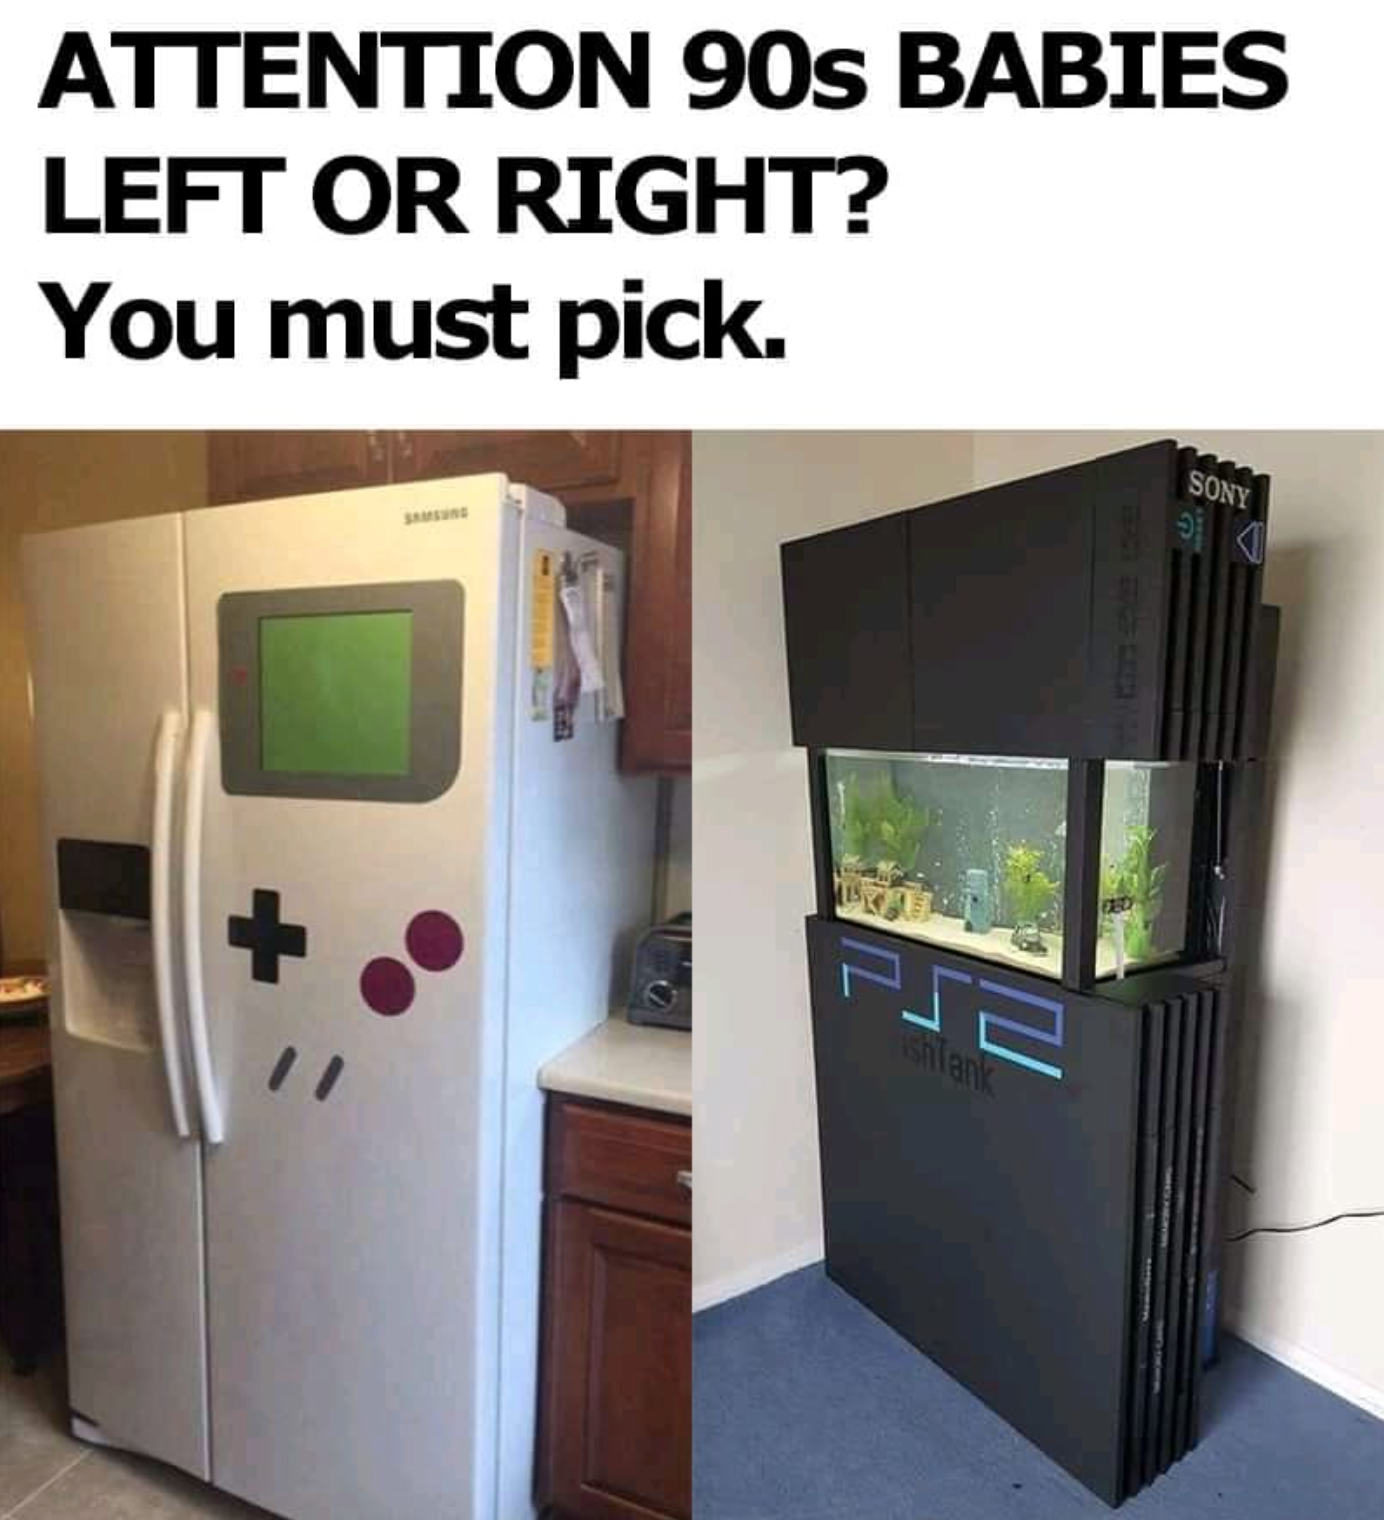 gaming memes and pics - gameboy fridge - Attention 90s Babies Left Or Right? You must pick. Sony